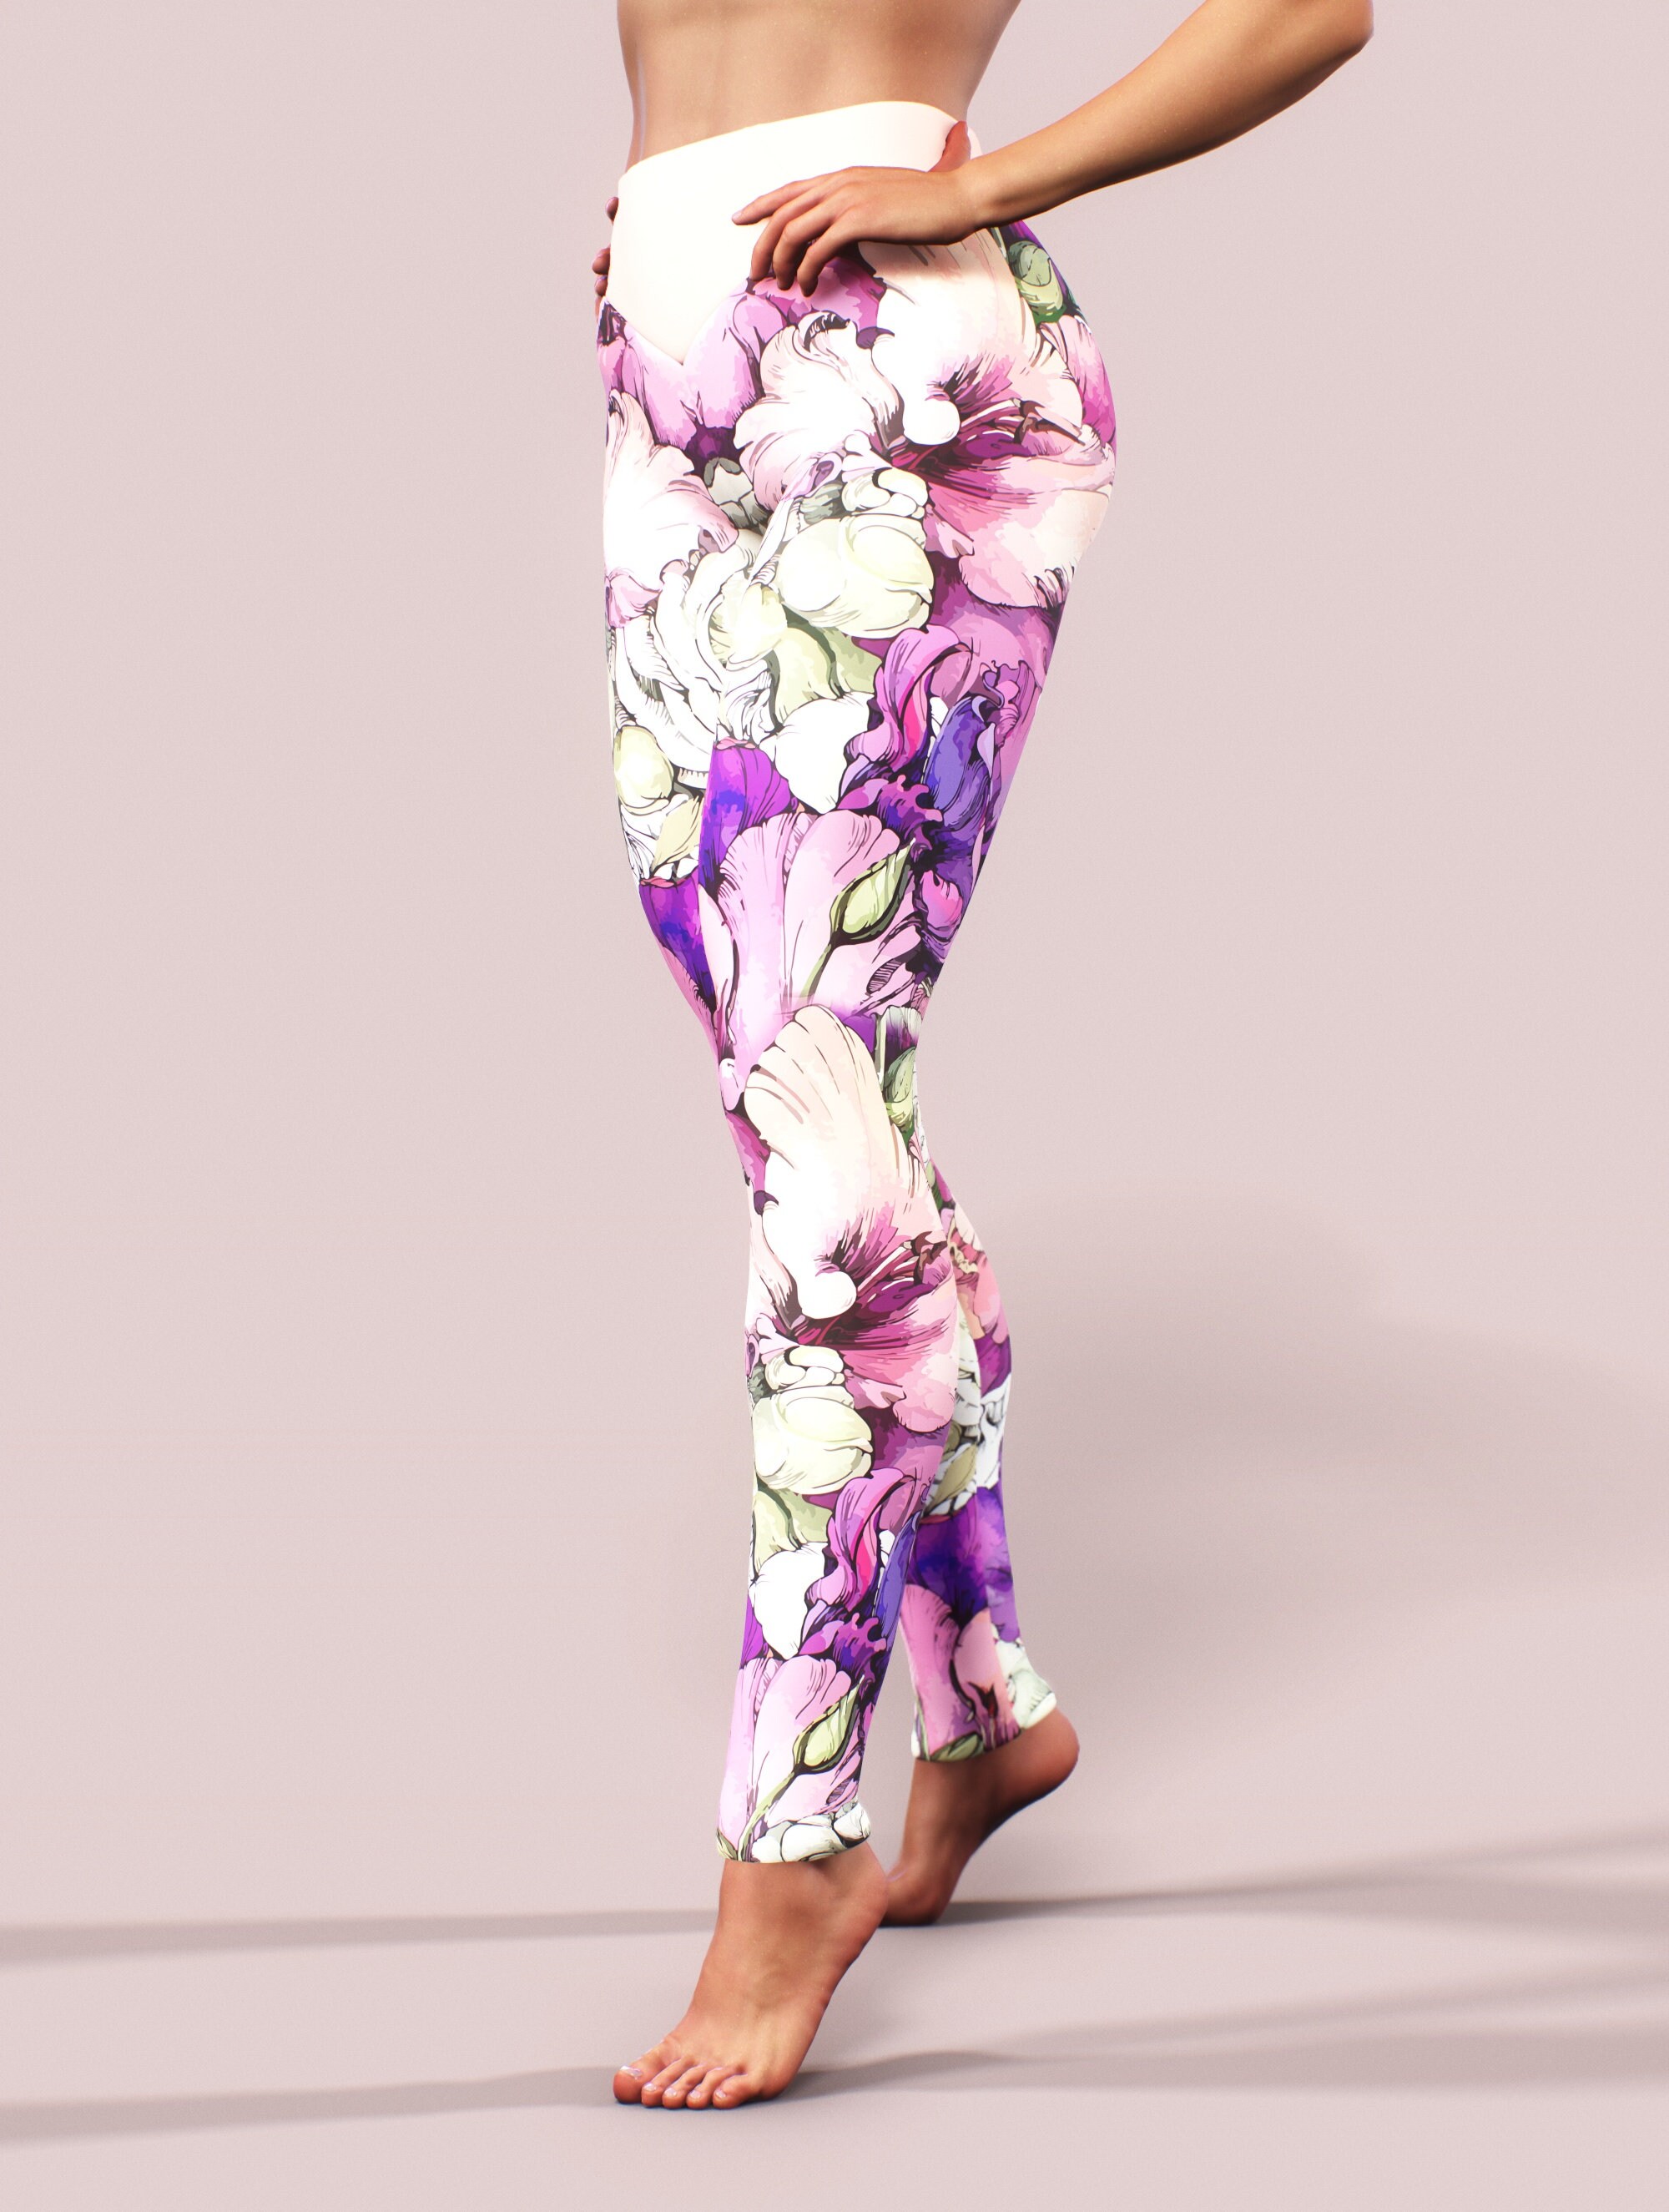 wholesale in bulk Hand Sketch Yoga Peony Leggings Roses Floral Active Drawn  Tights Pink Workout Clothing Women Women Pants Gym Activewear Athletic  Floral for Apparel .com: Gym Sportswear Pink Purple Flower Push